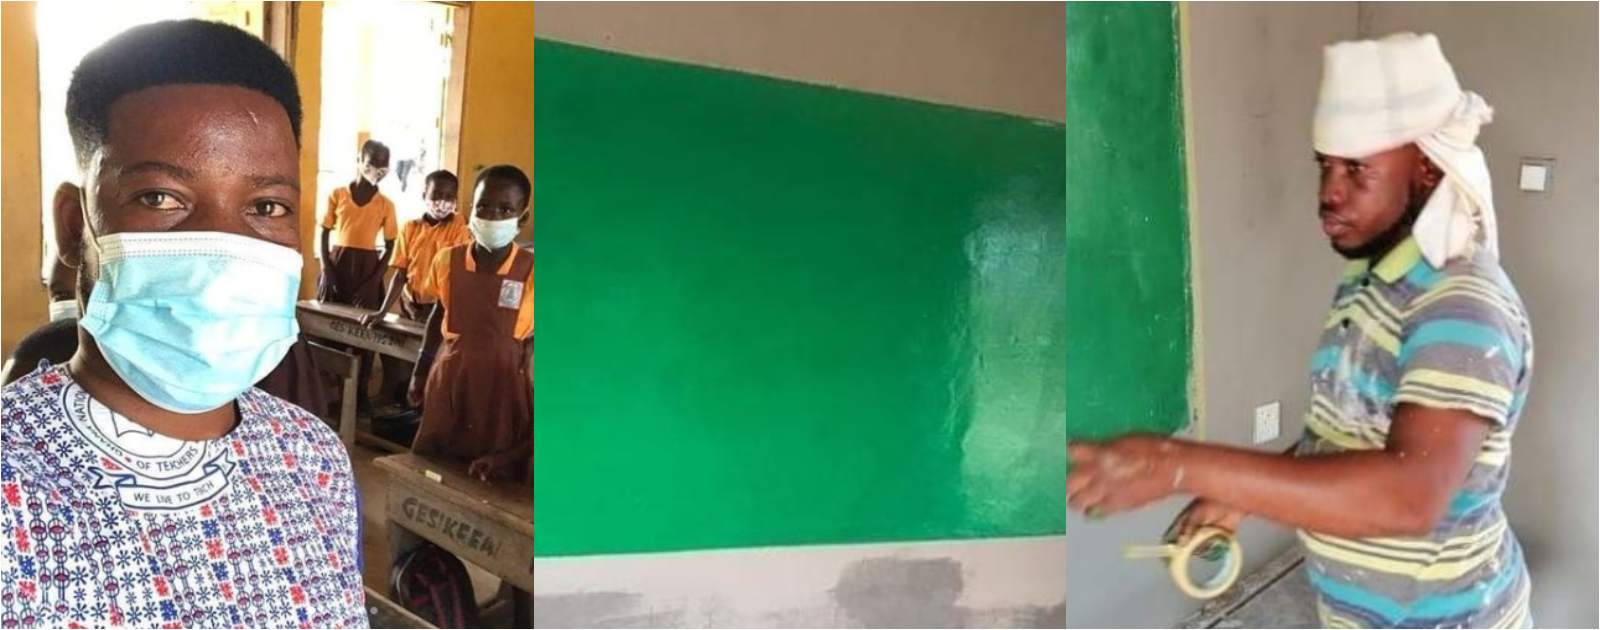 Nana Kojo Butler: Ghanaian teacher paints classroom with his money to welcome students (Photos)